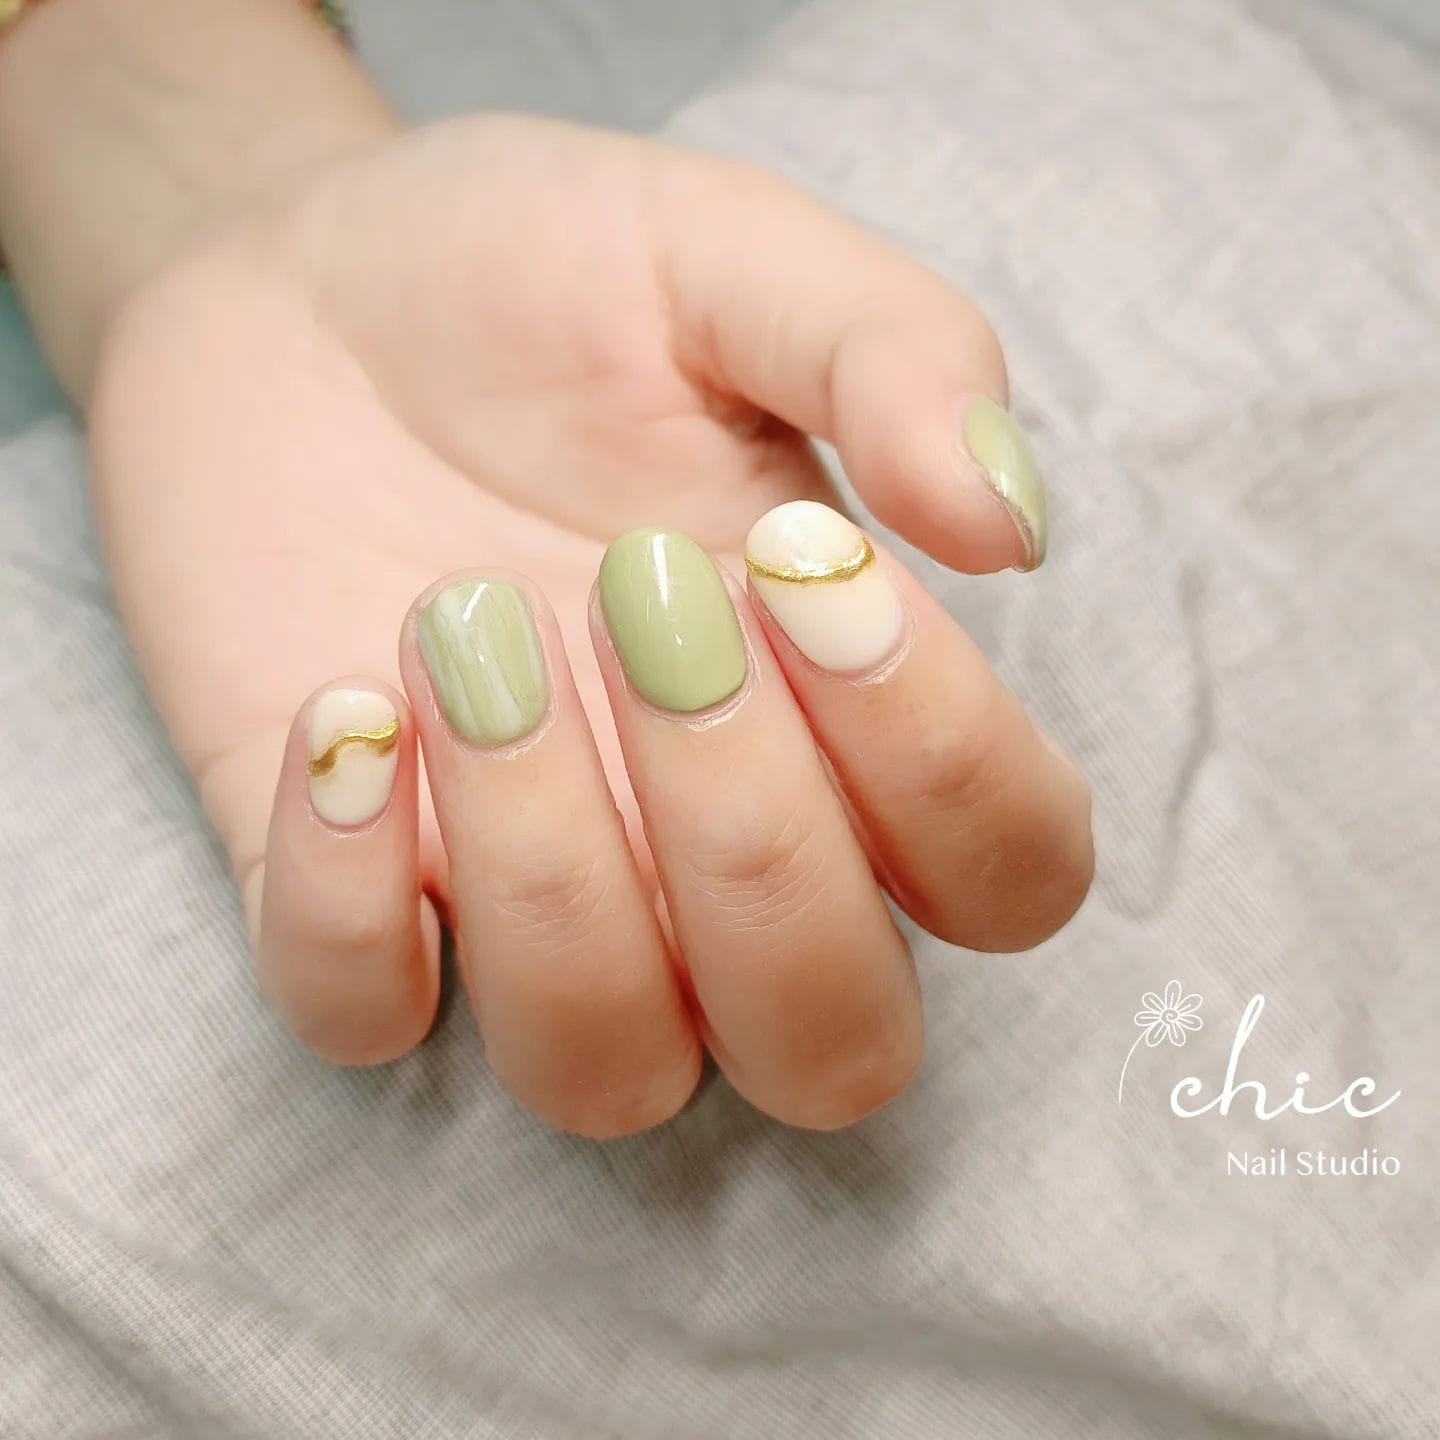 50+ Cute Short Nail Designs You’ll Want To Try Today images 32